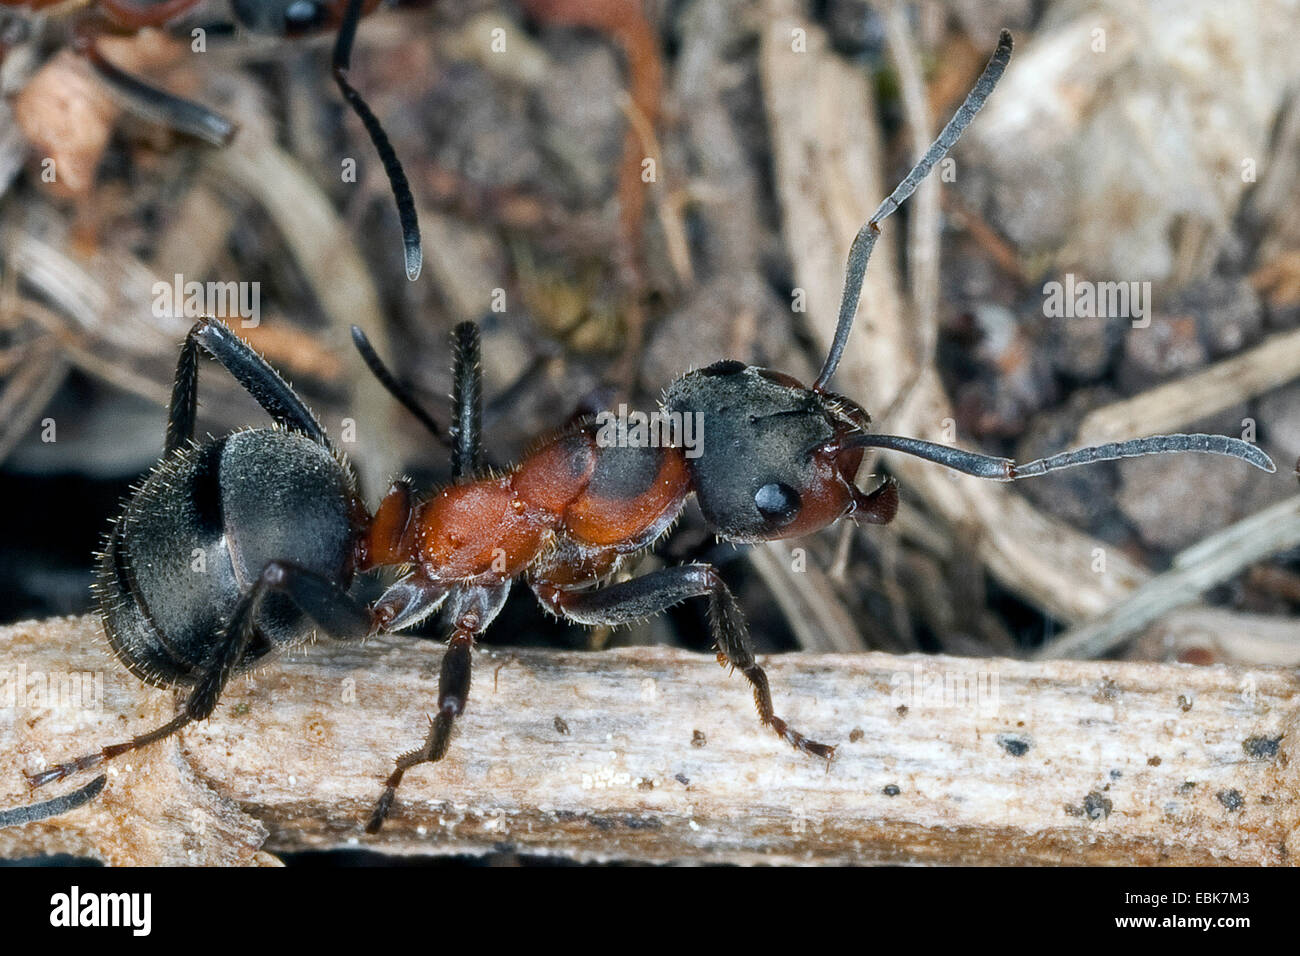 European Red Wood Ant (Formica pratensis), creeping on a sprout, Germany Stock Photo